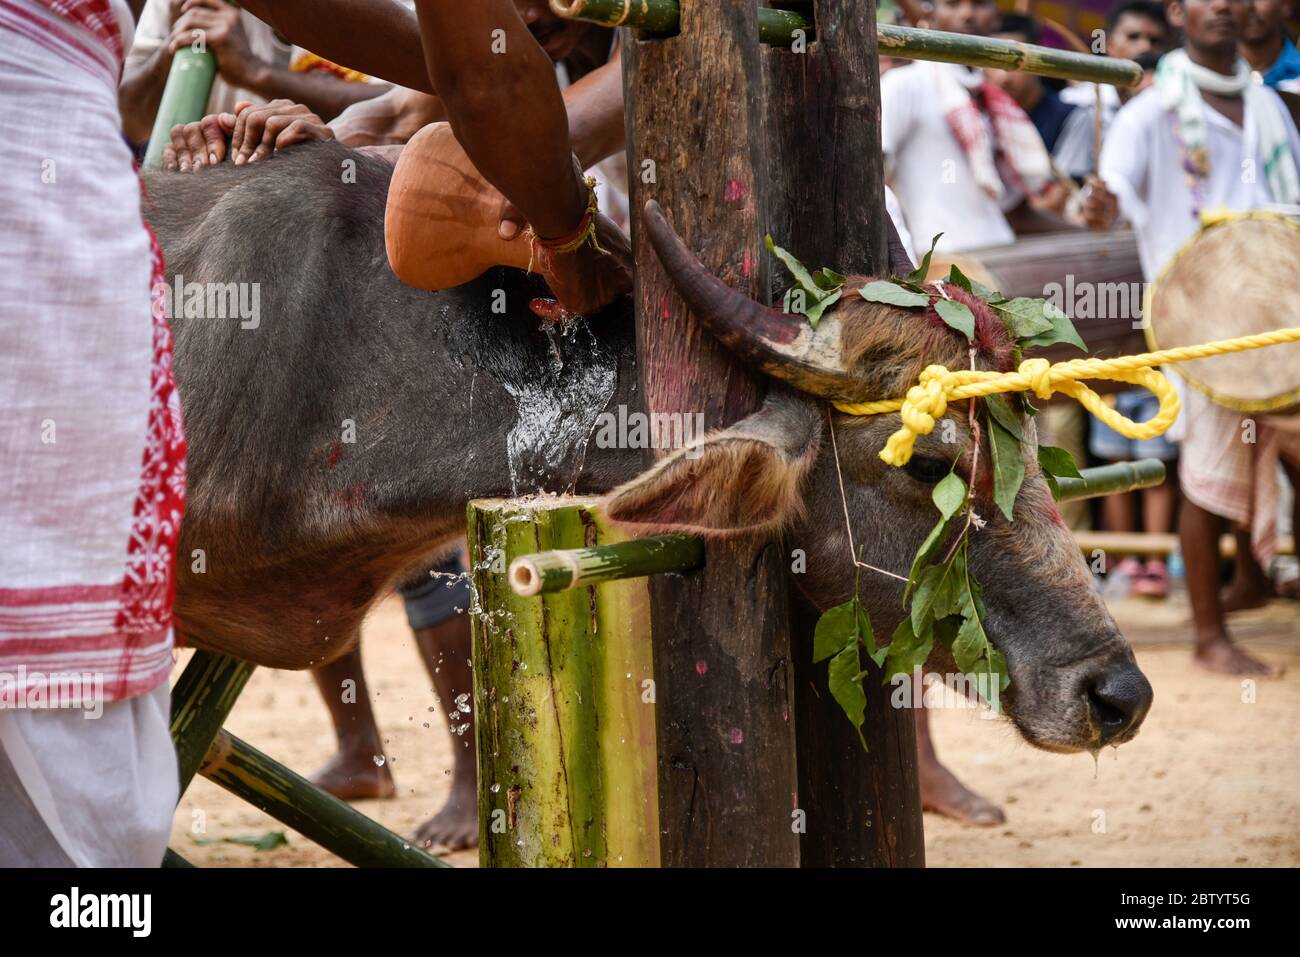 INDIA: The sacrifice's eyes are full of despondent sadness as it meekly waits for the killing blow. GRUESOME photos show ruthless crowds baying for bl Stock Photo